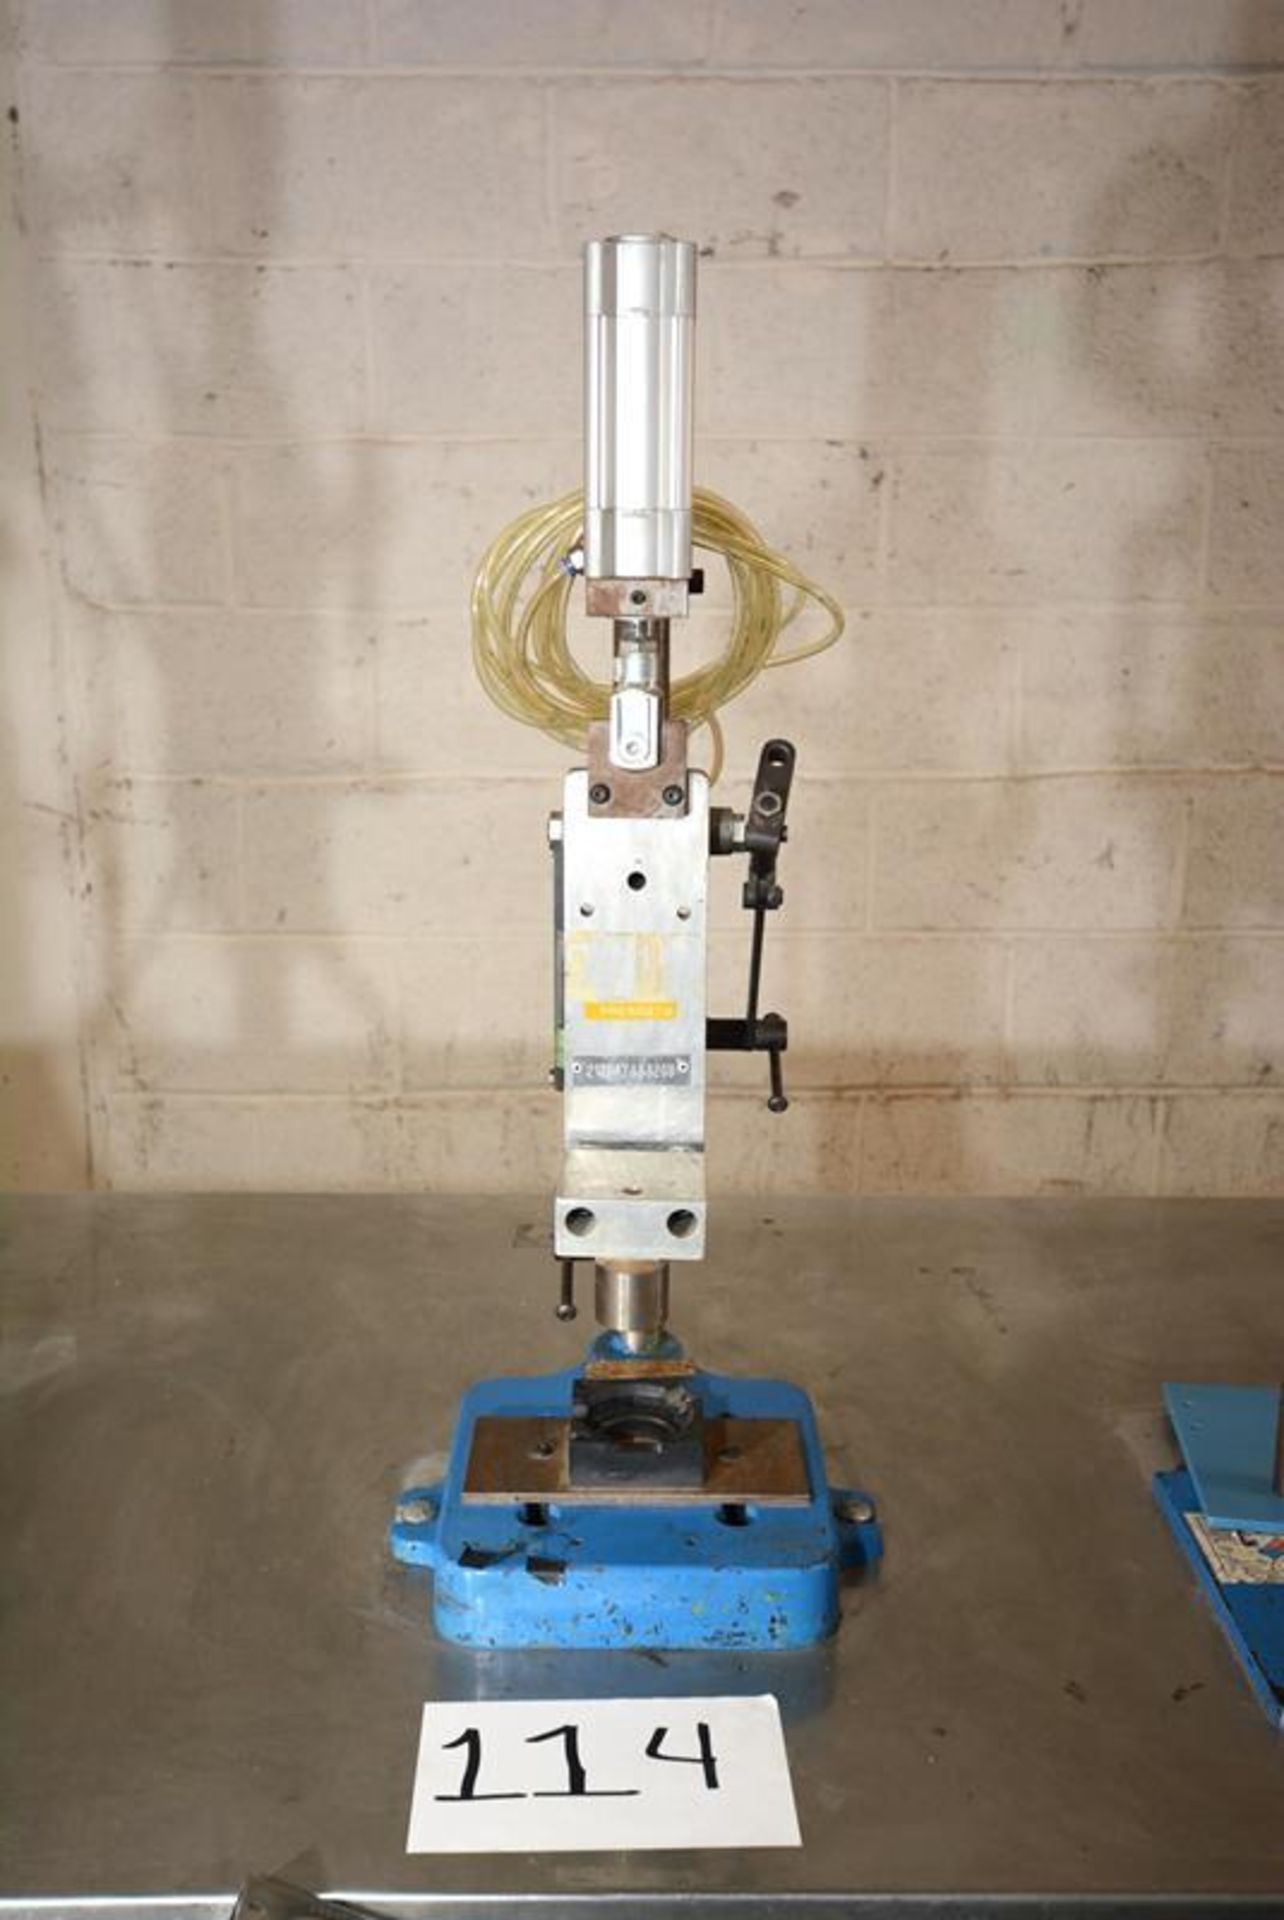 Workstation with two press. Brand: N/A. Model: N/A. Year: N/A. Serial Number: N/A. Possible Uses: - Image 5 of 15